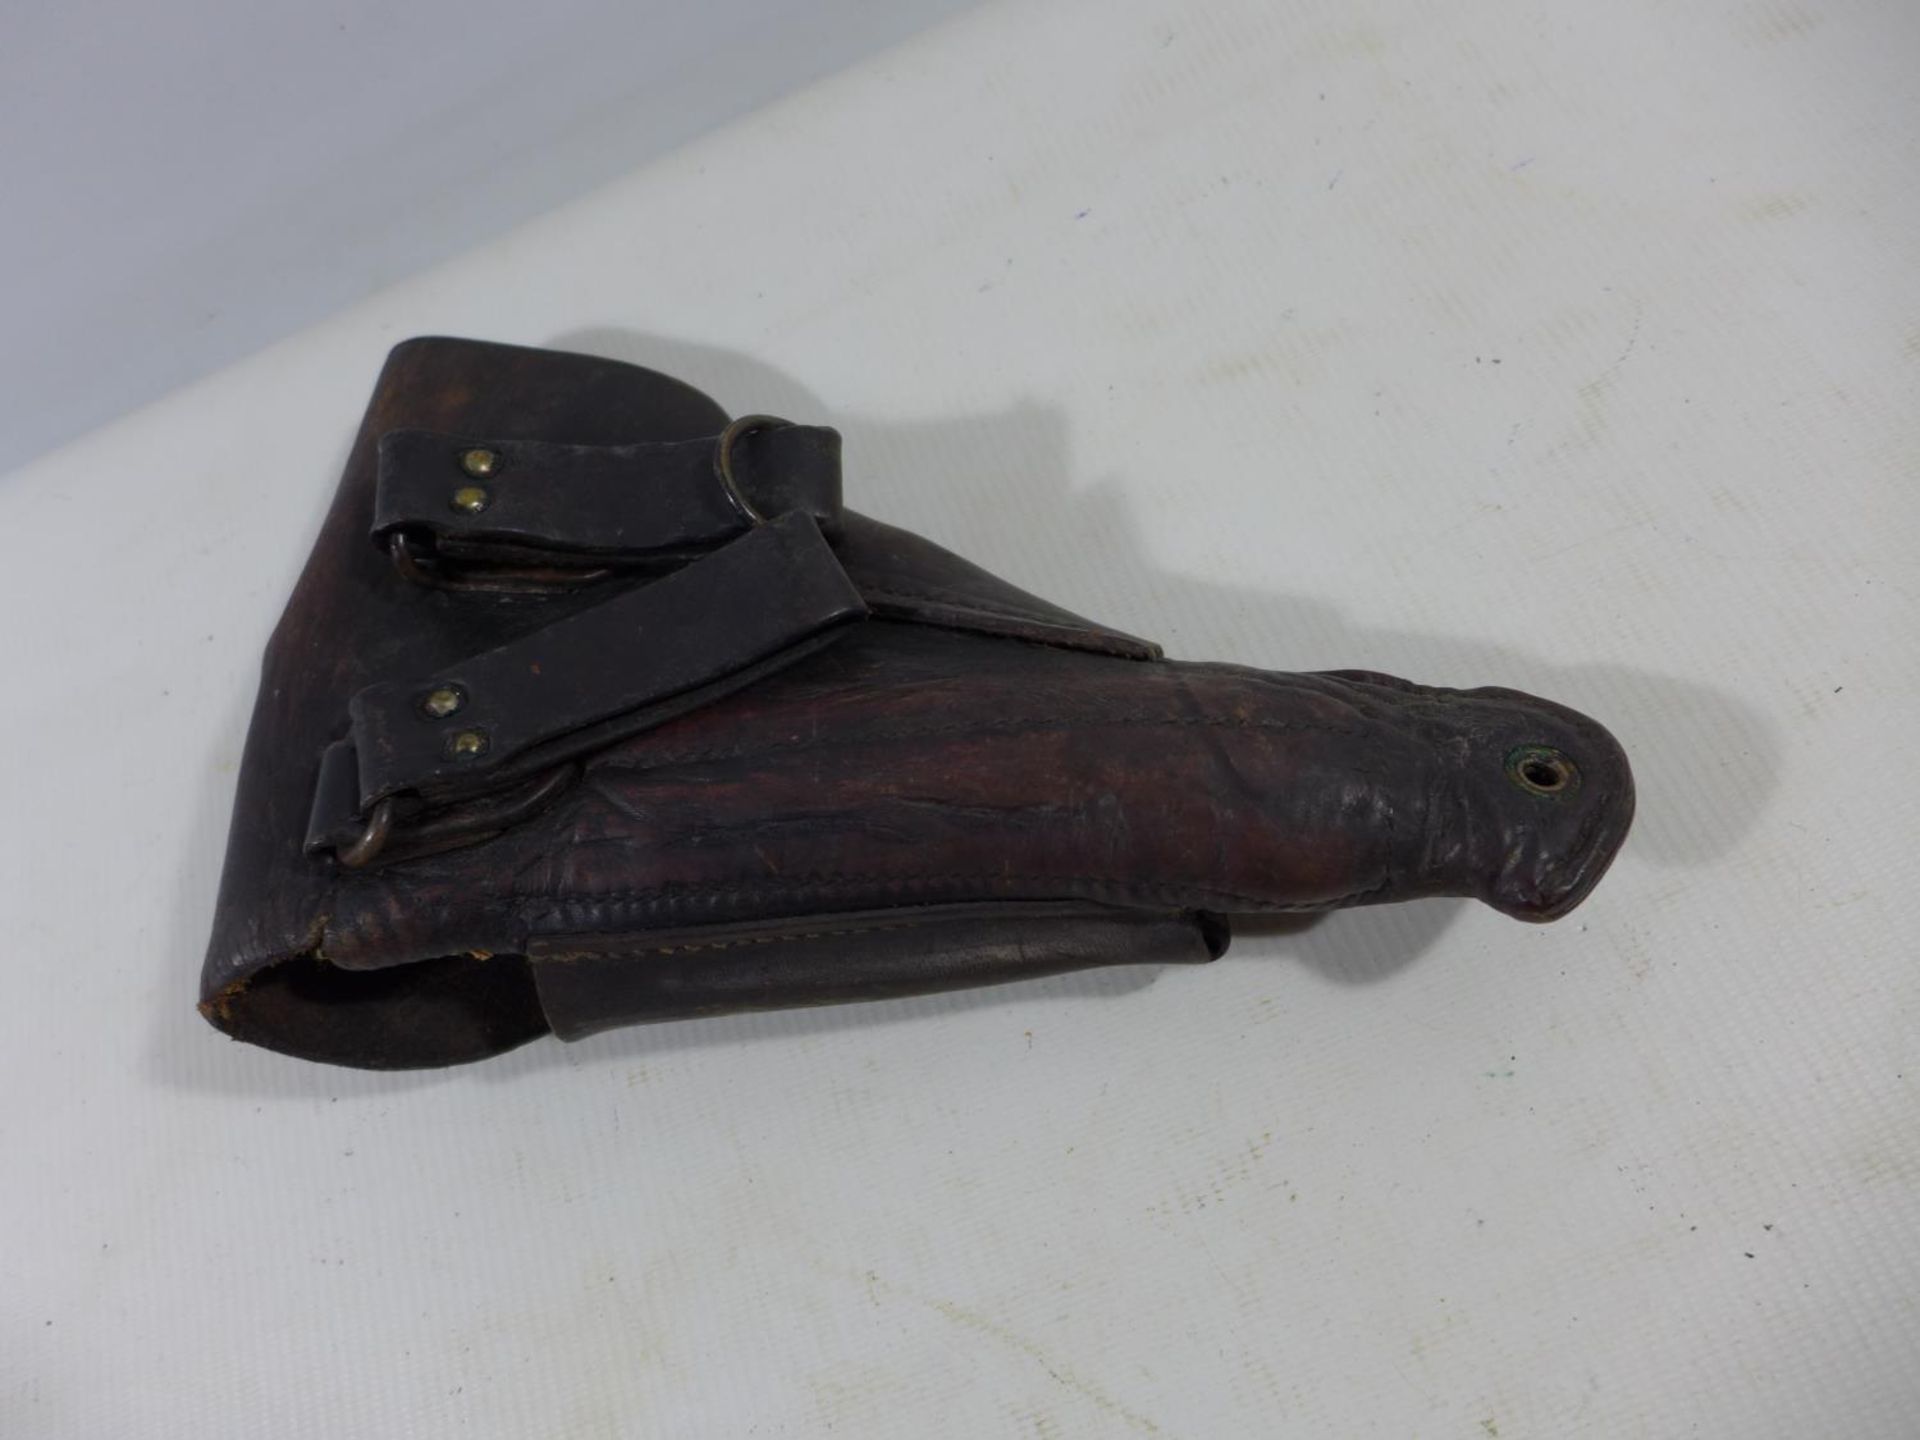 A WORLD WAR II PERIOD LEATHER AUTOMATIC PISTOL HOLSTER - Image 2 of 3